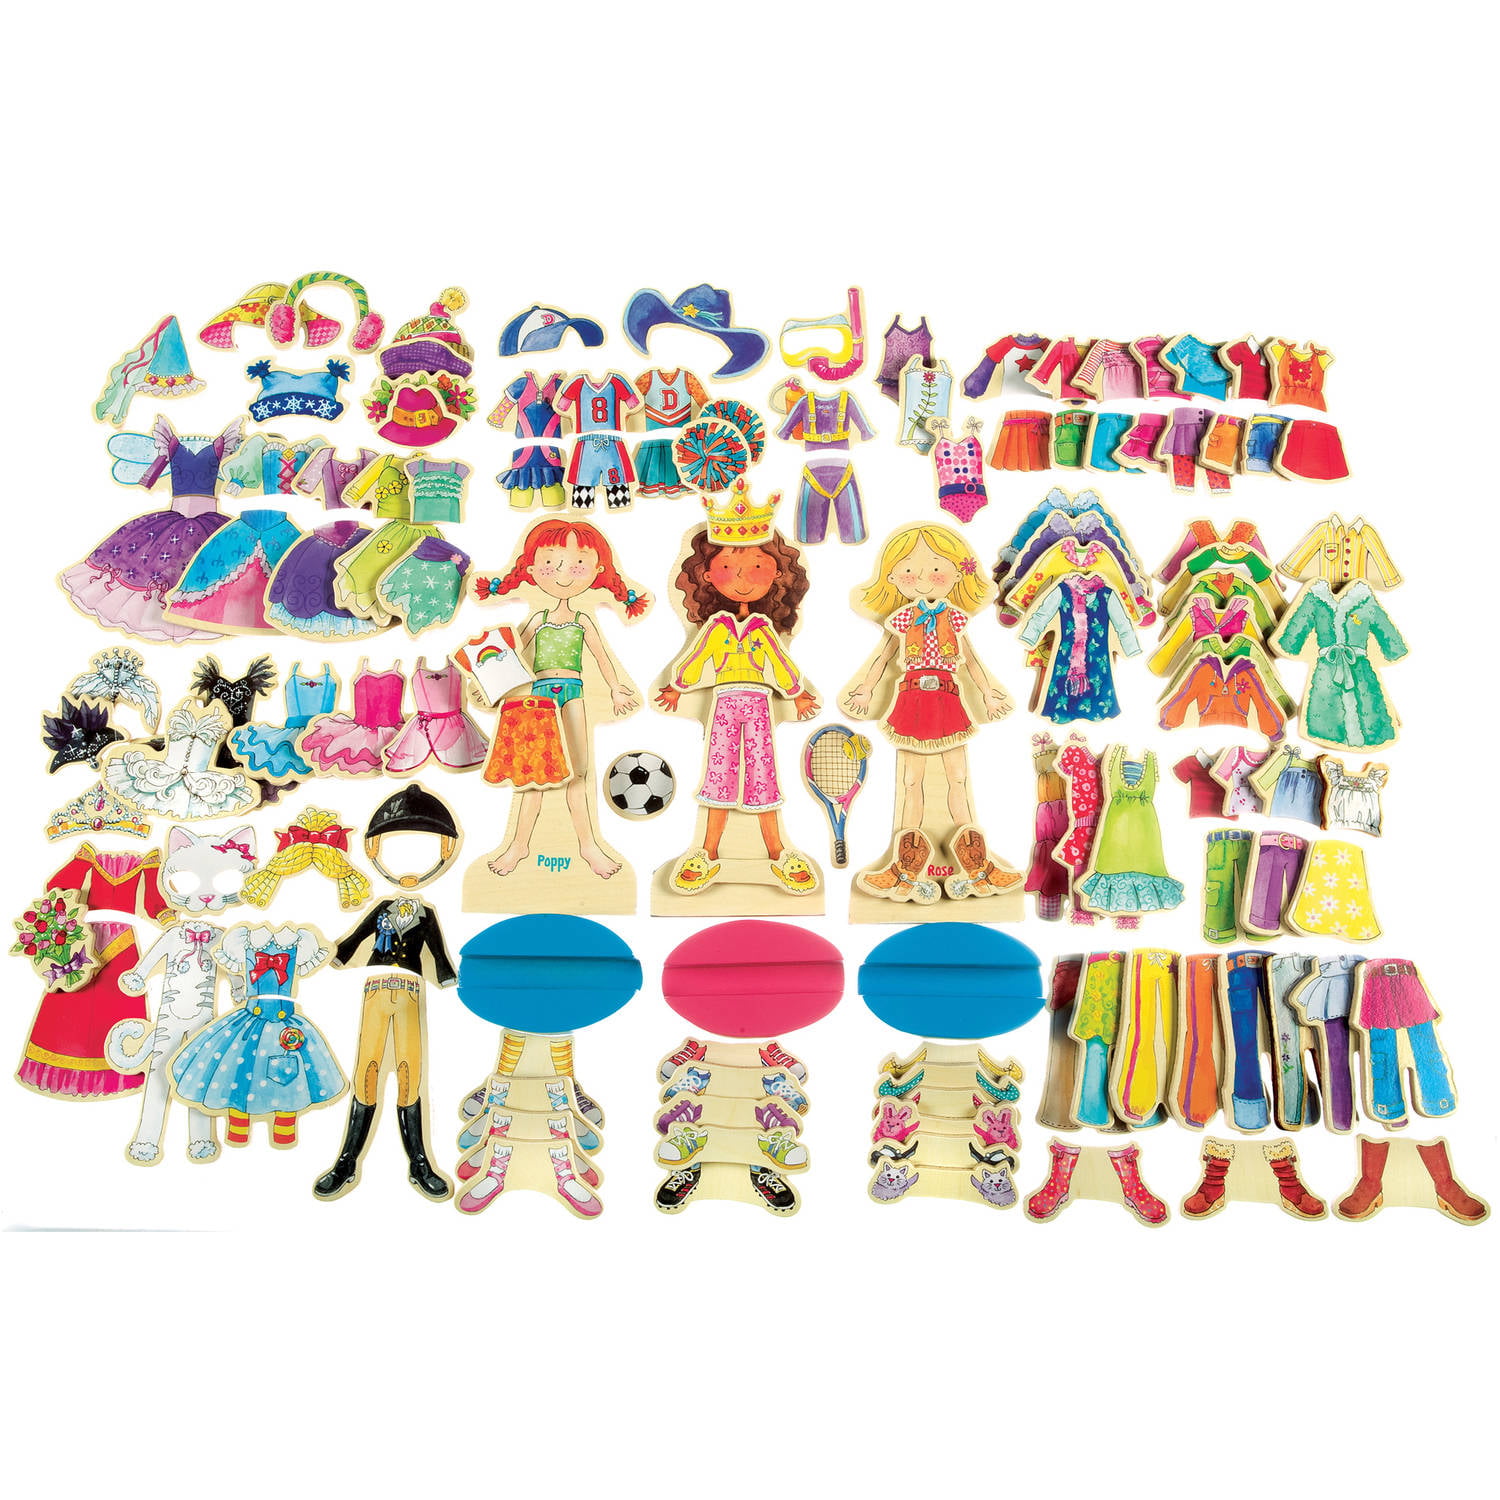 T.S. Shure Dress and Stick Paper Dolls Creativity Set and Book 